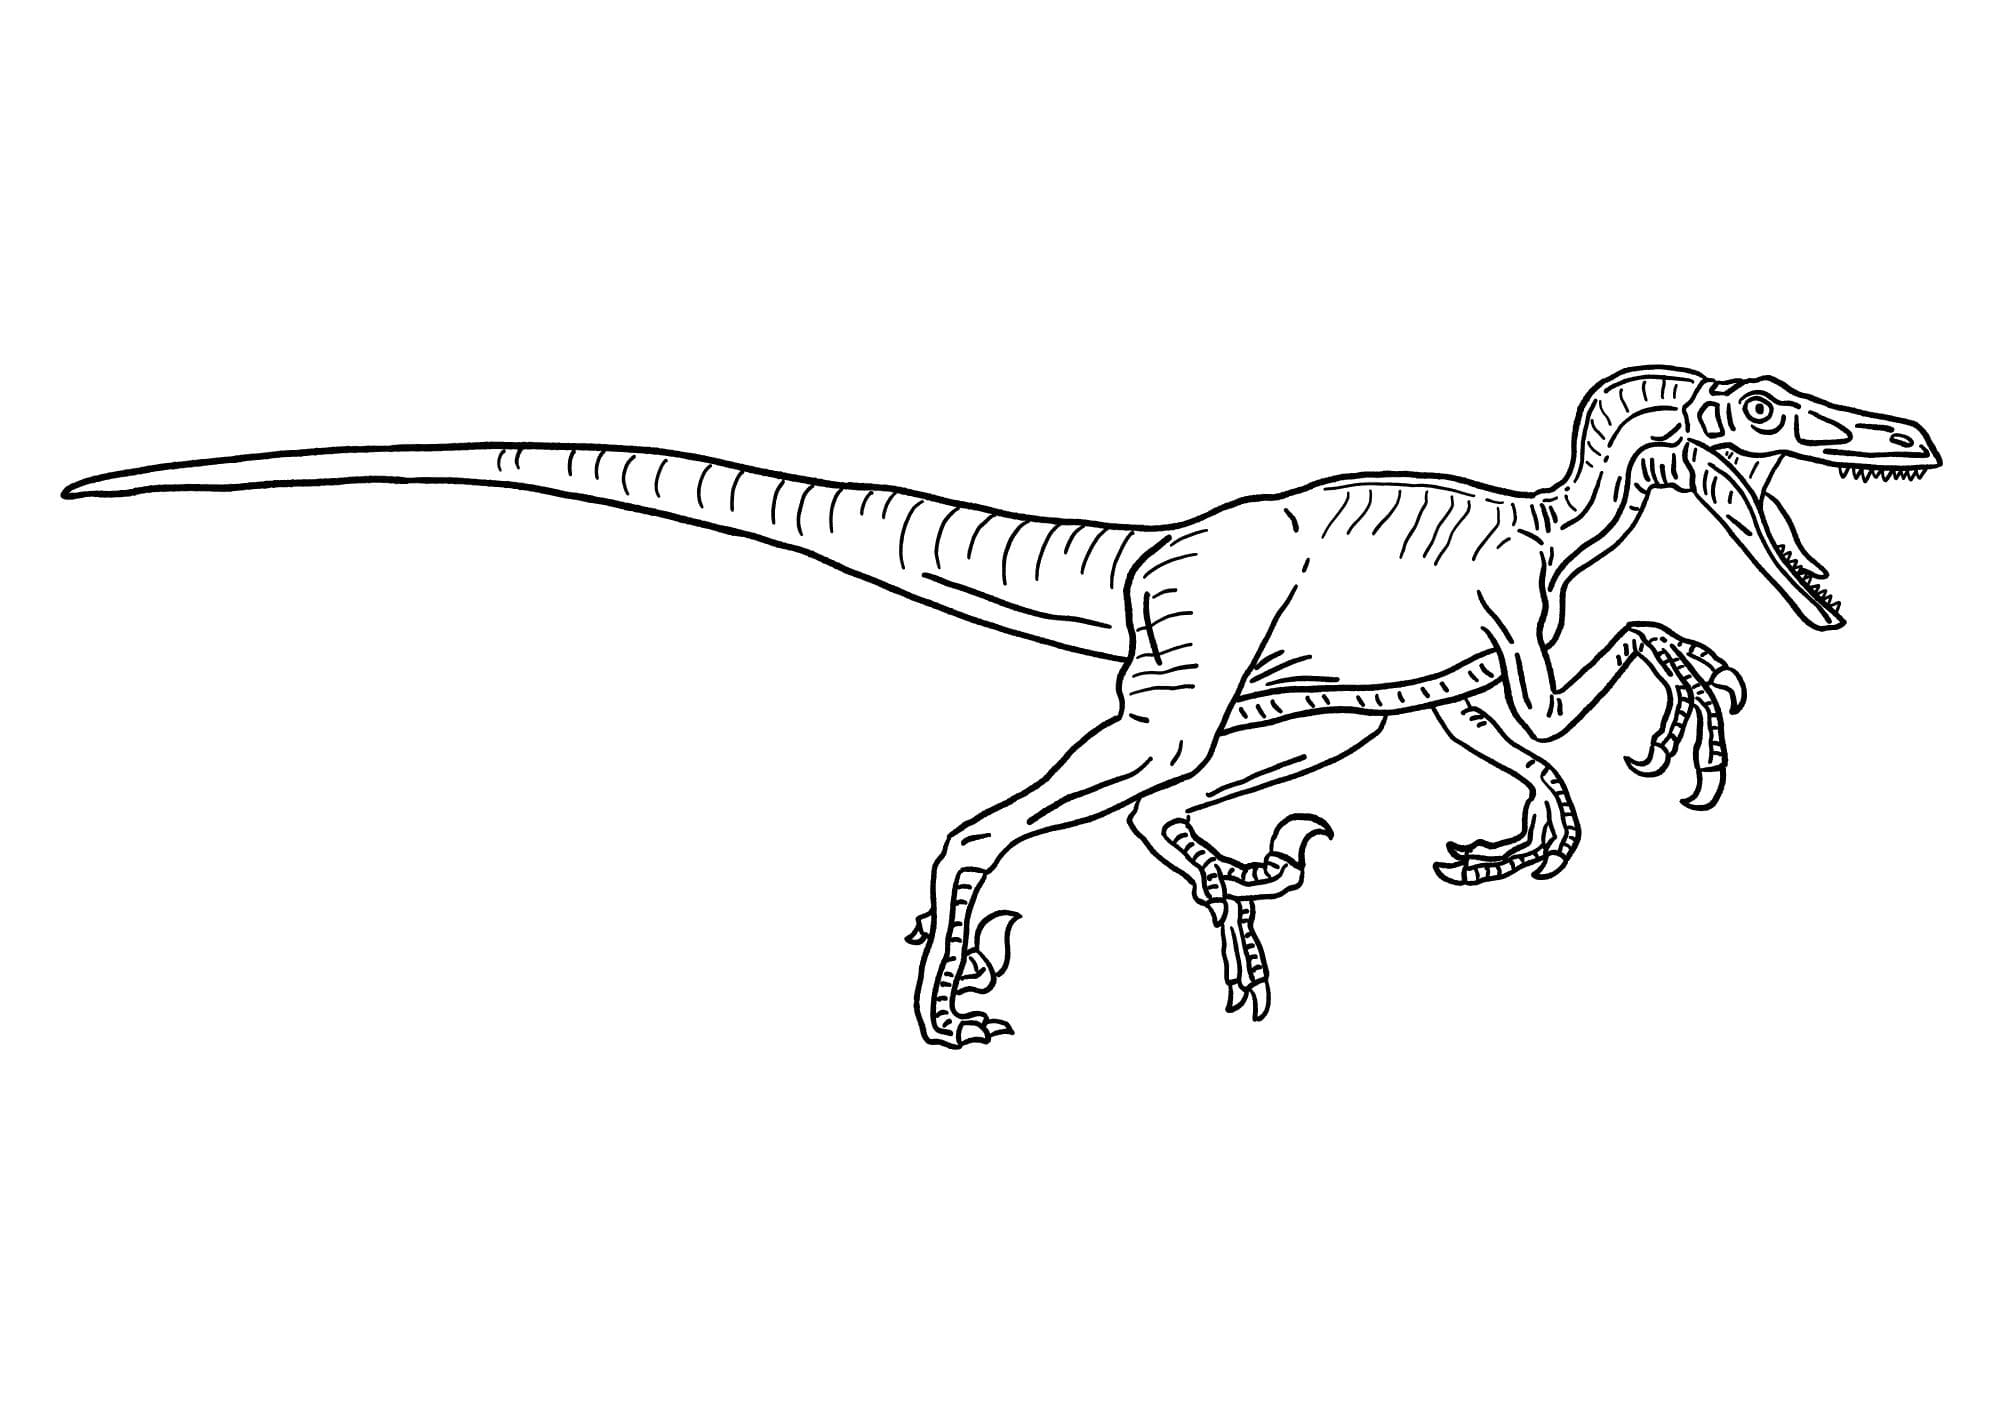 Velociraptor pictures to color (Free + Printable)